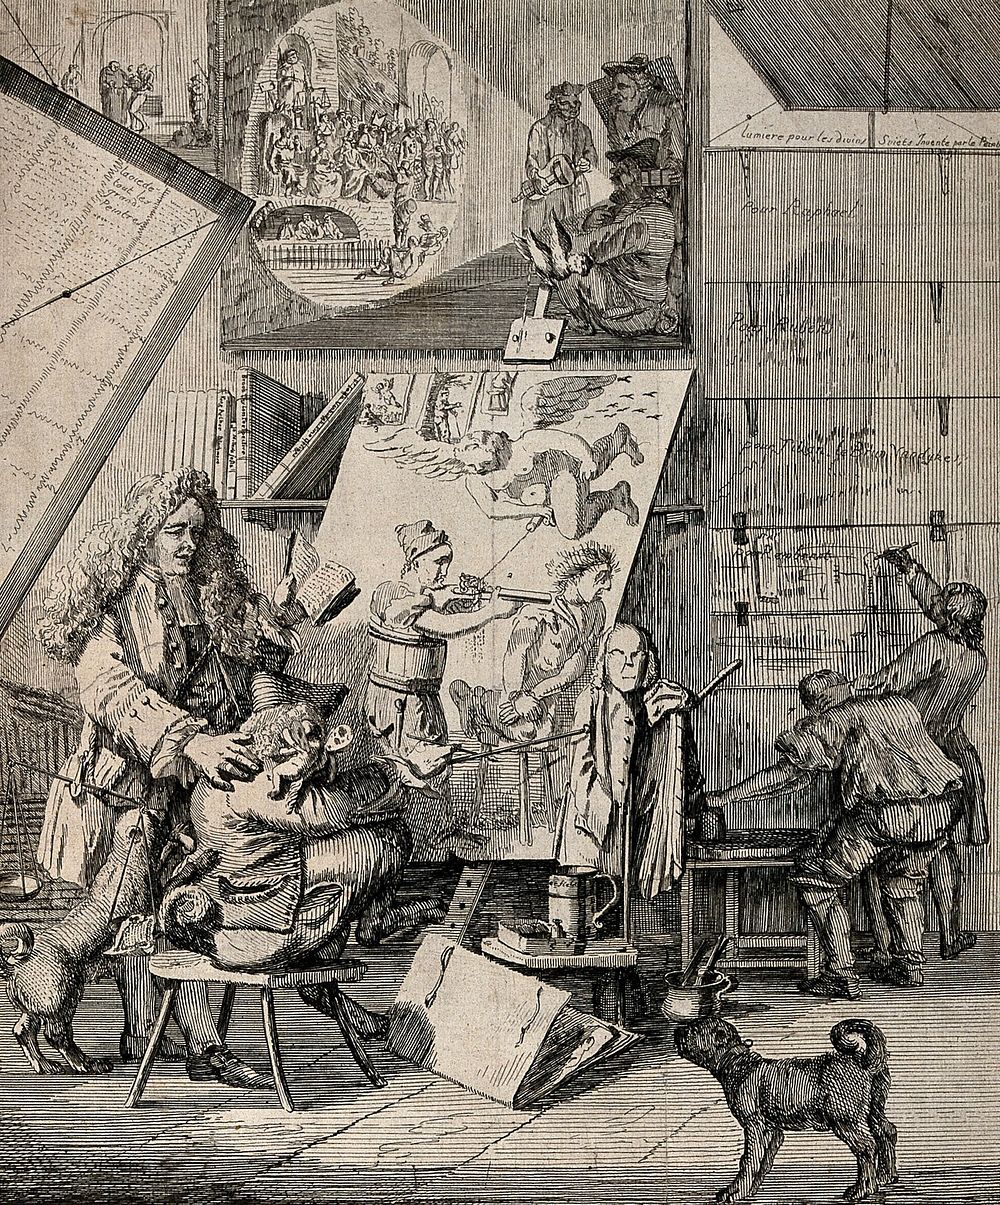 William Hogarth with a parody of the ideas expressed in his 'Analysis of beauty'. Etching by P. Sandby, 1753.